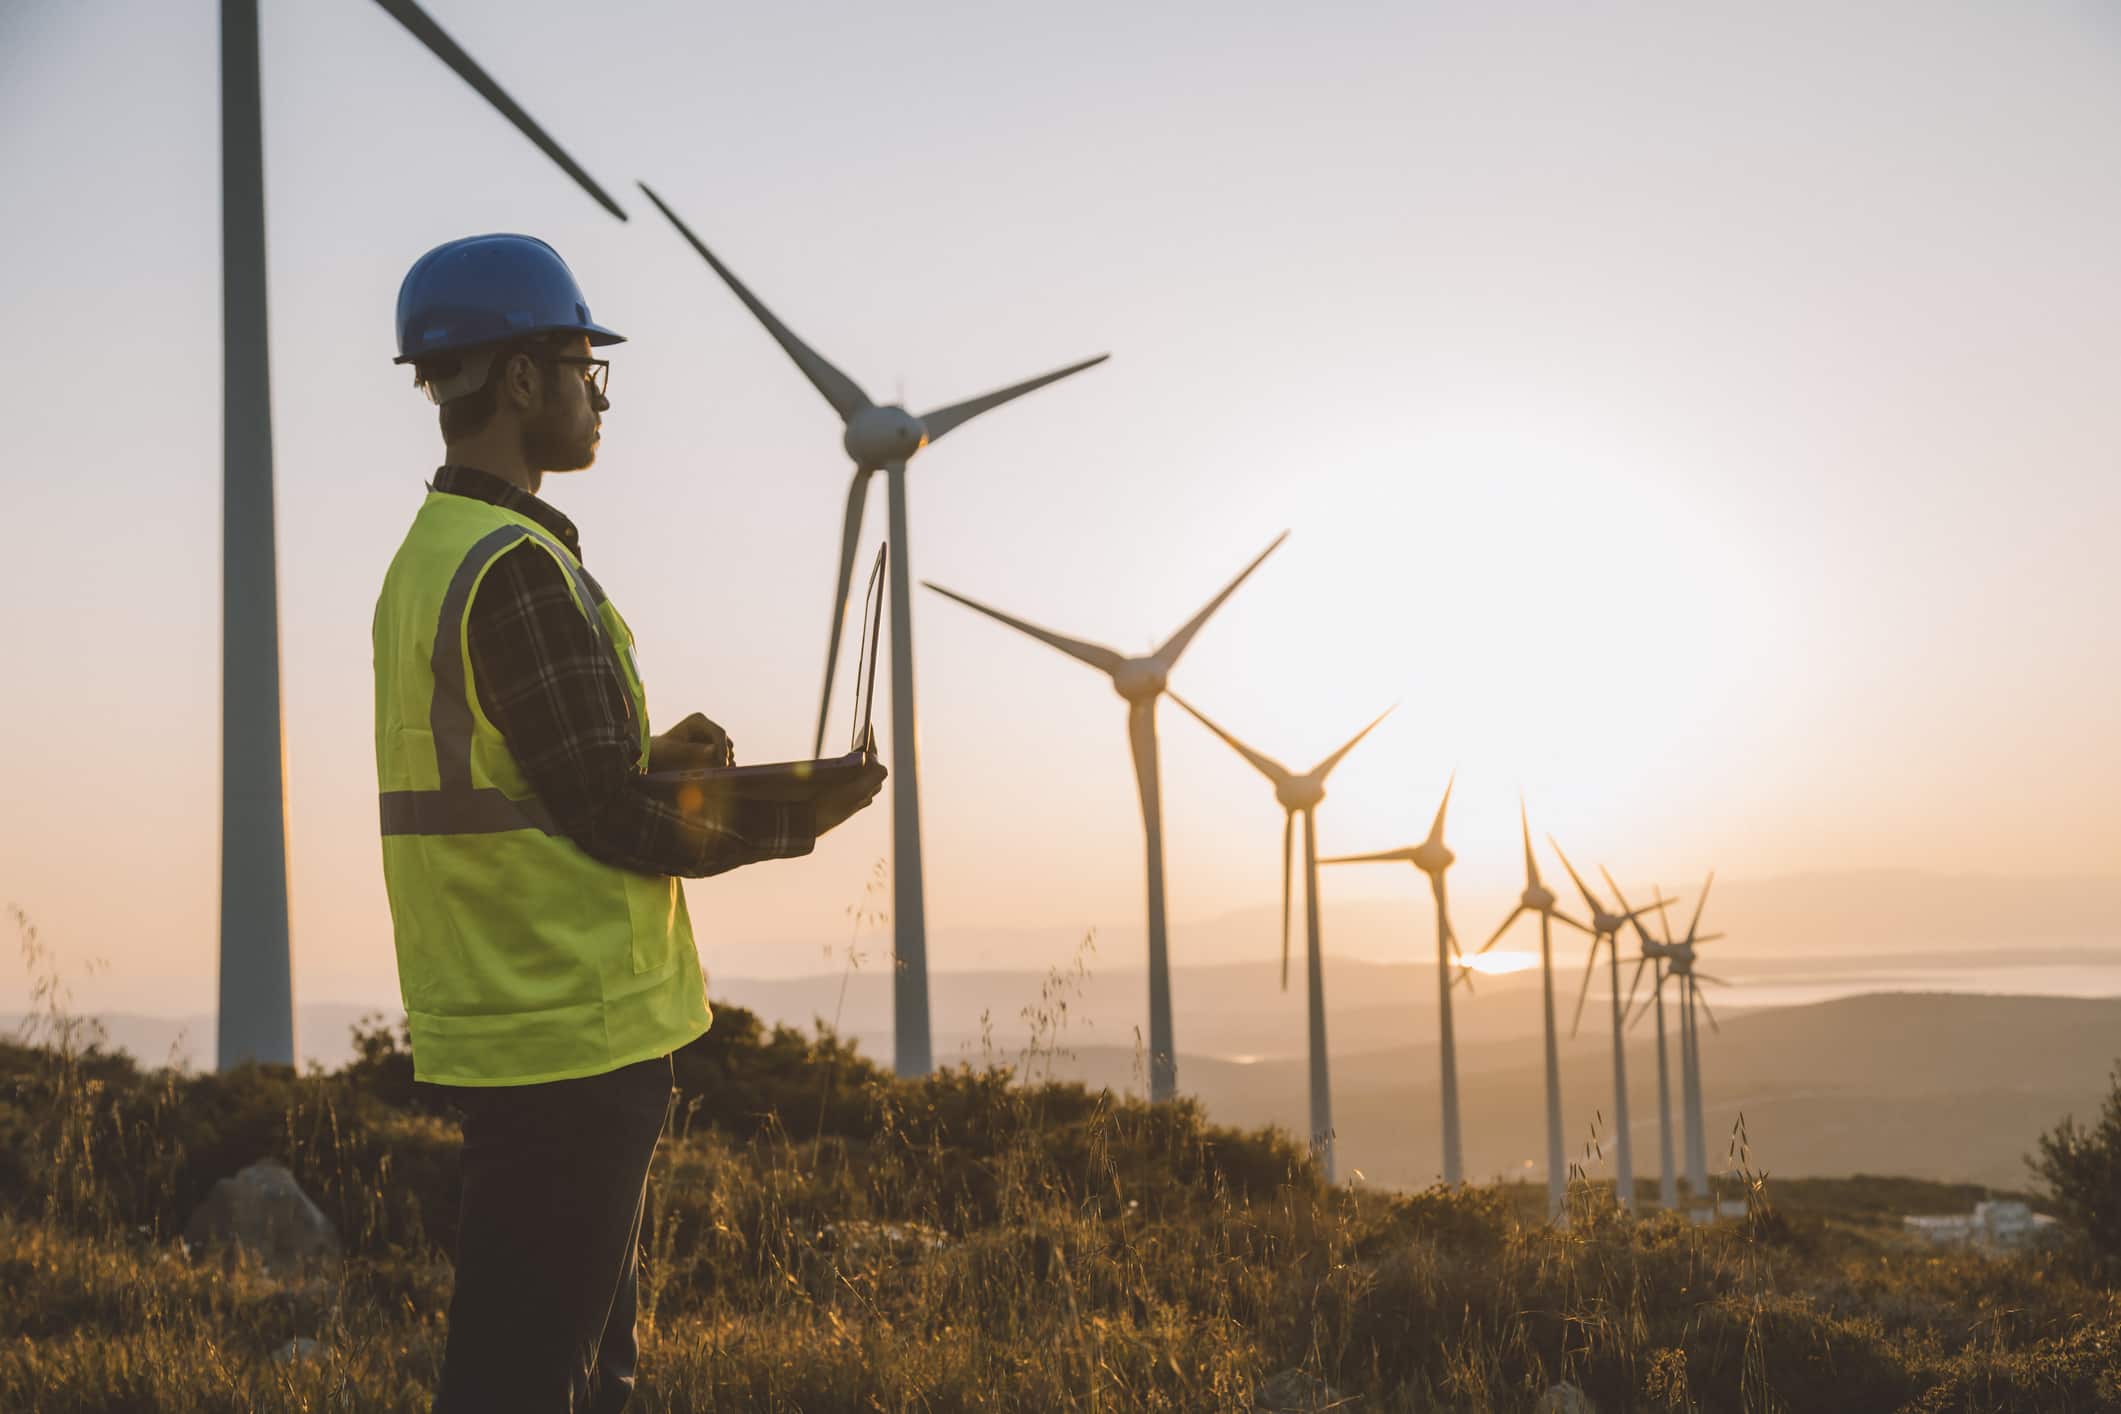 An engineer in high vis and hard hat stands looking across a field of wind turbines